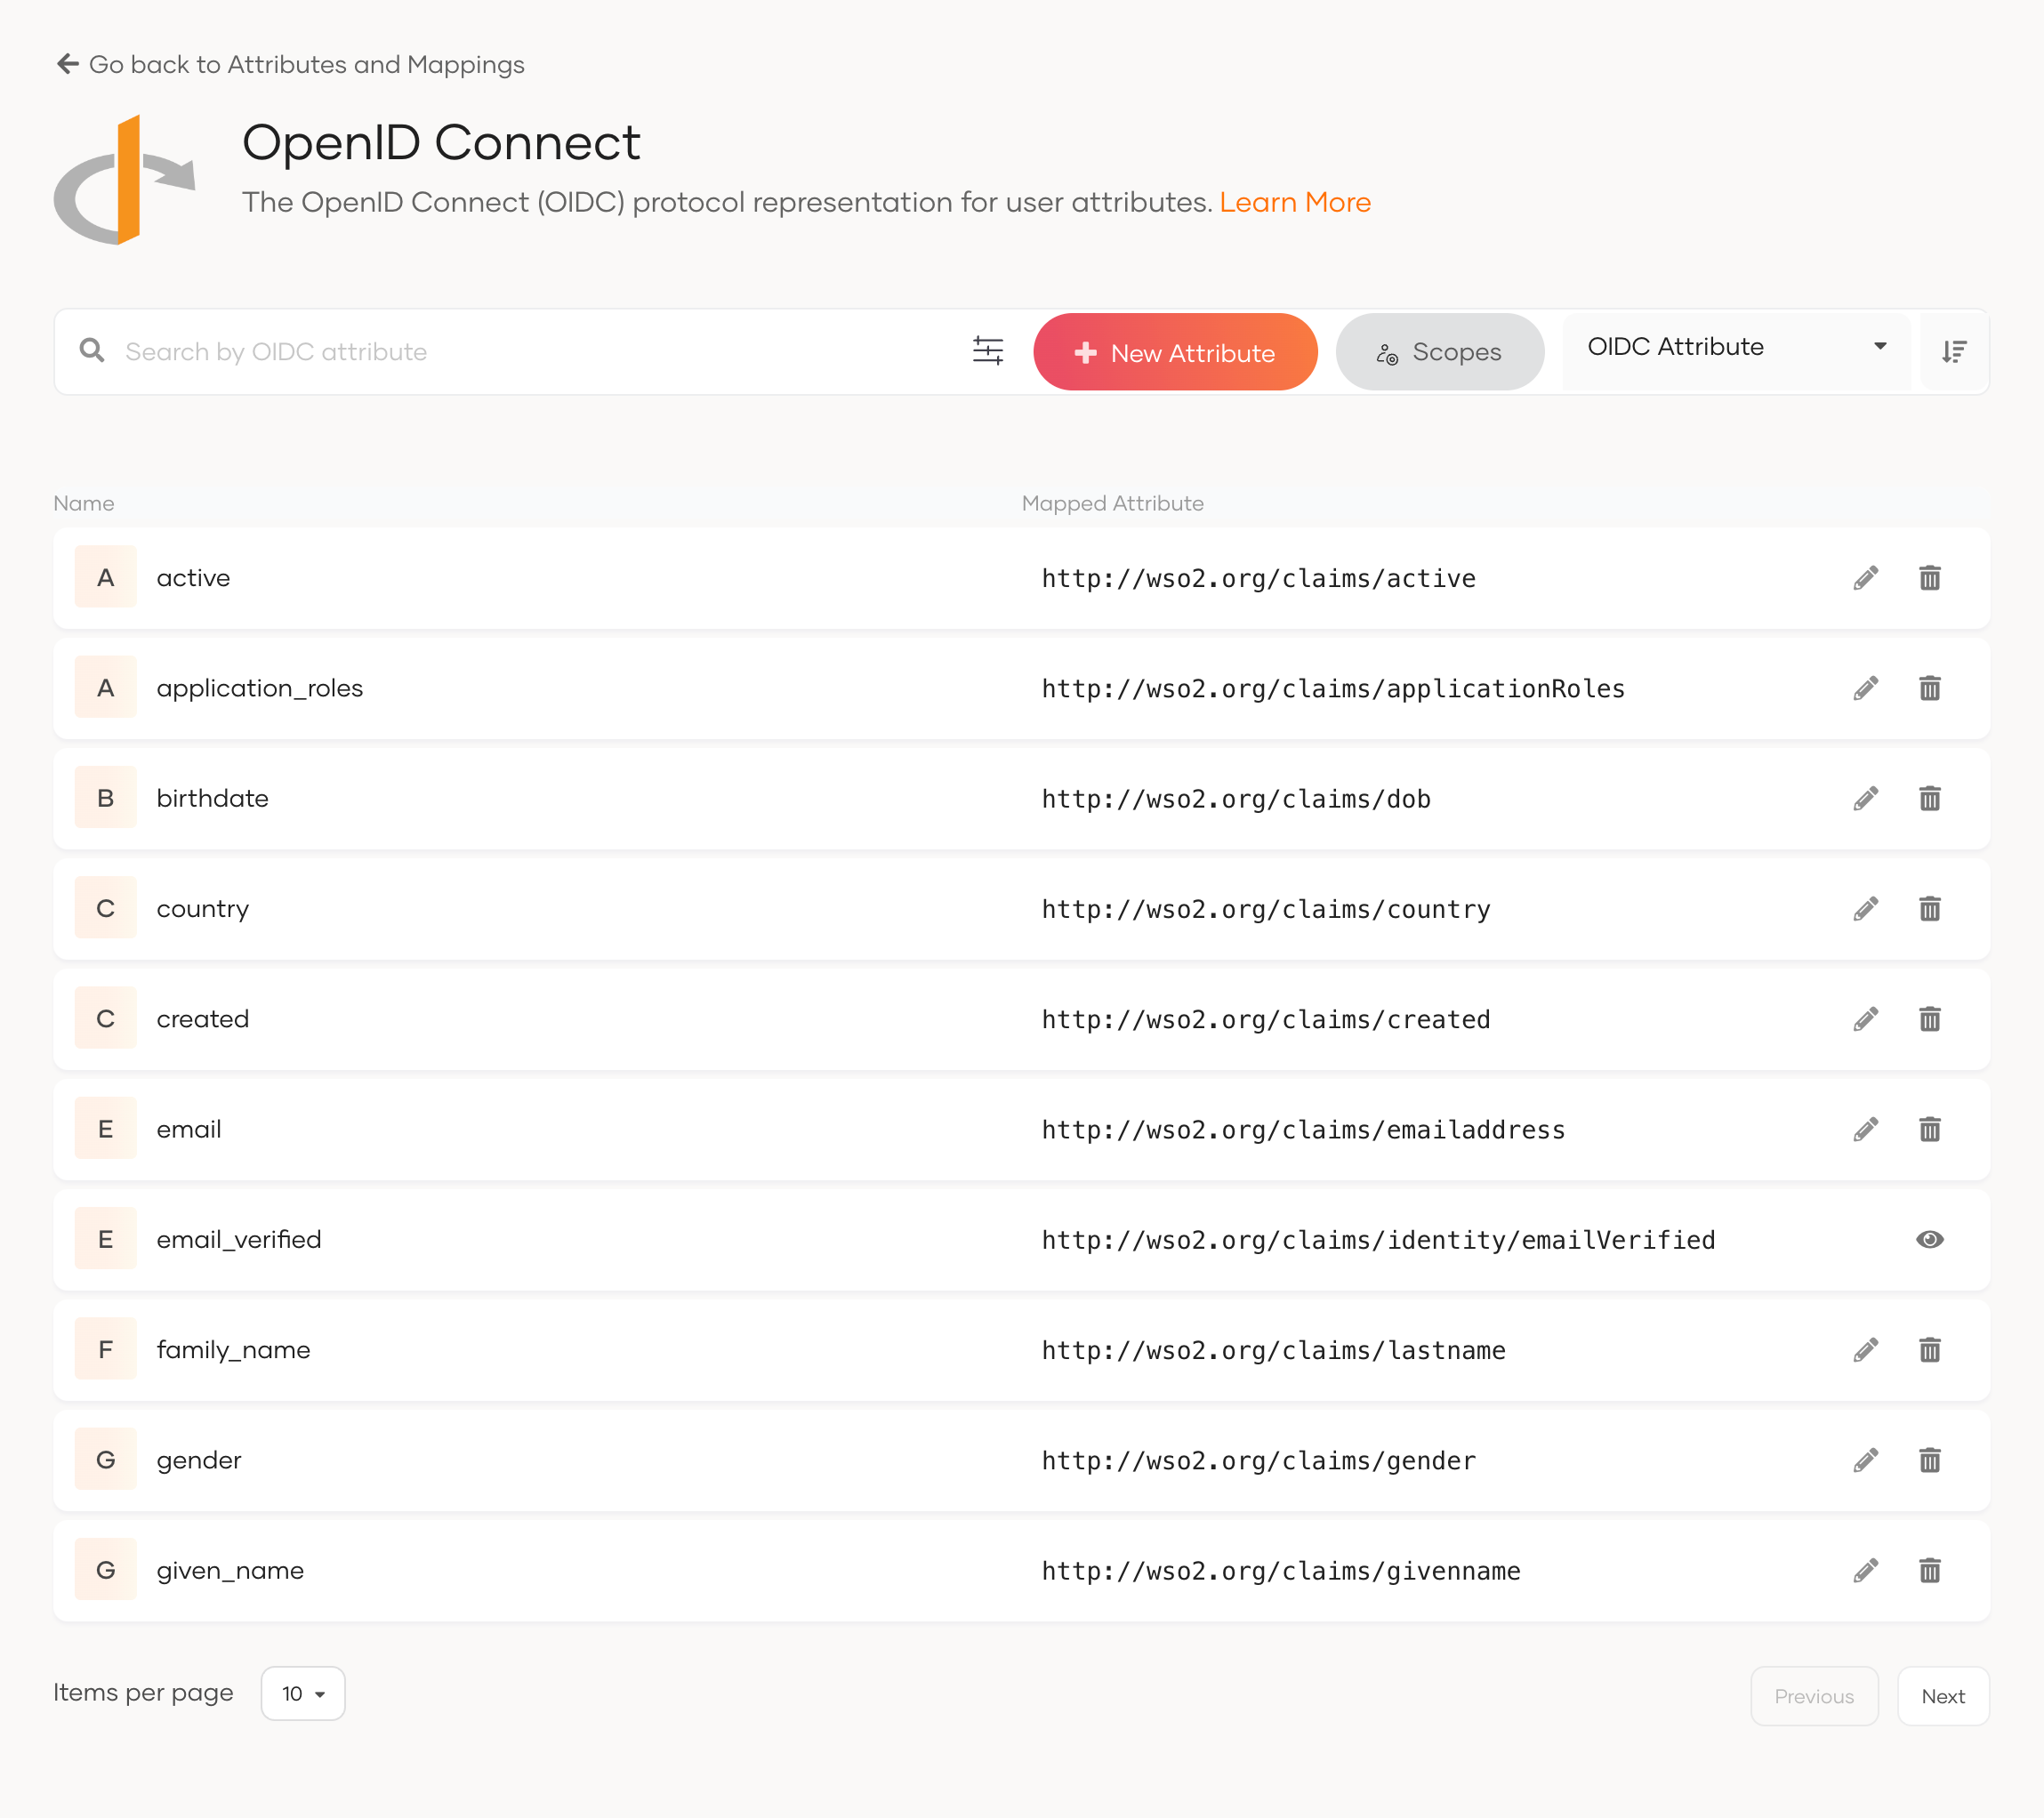 View OpenID Connect attributes